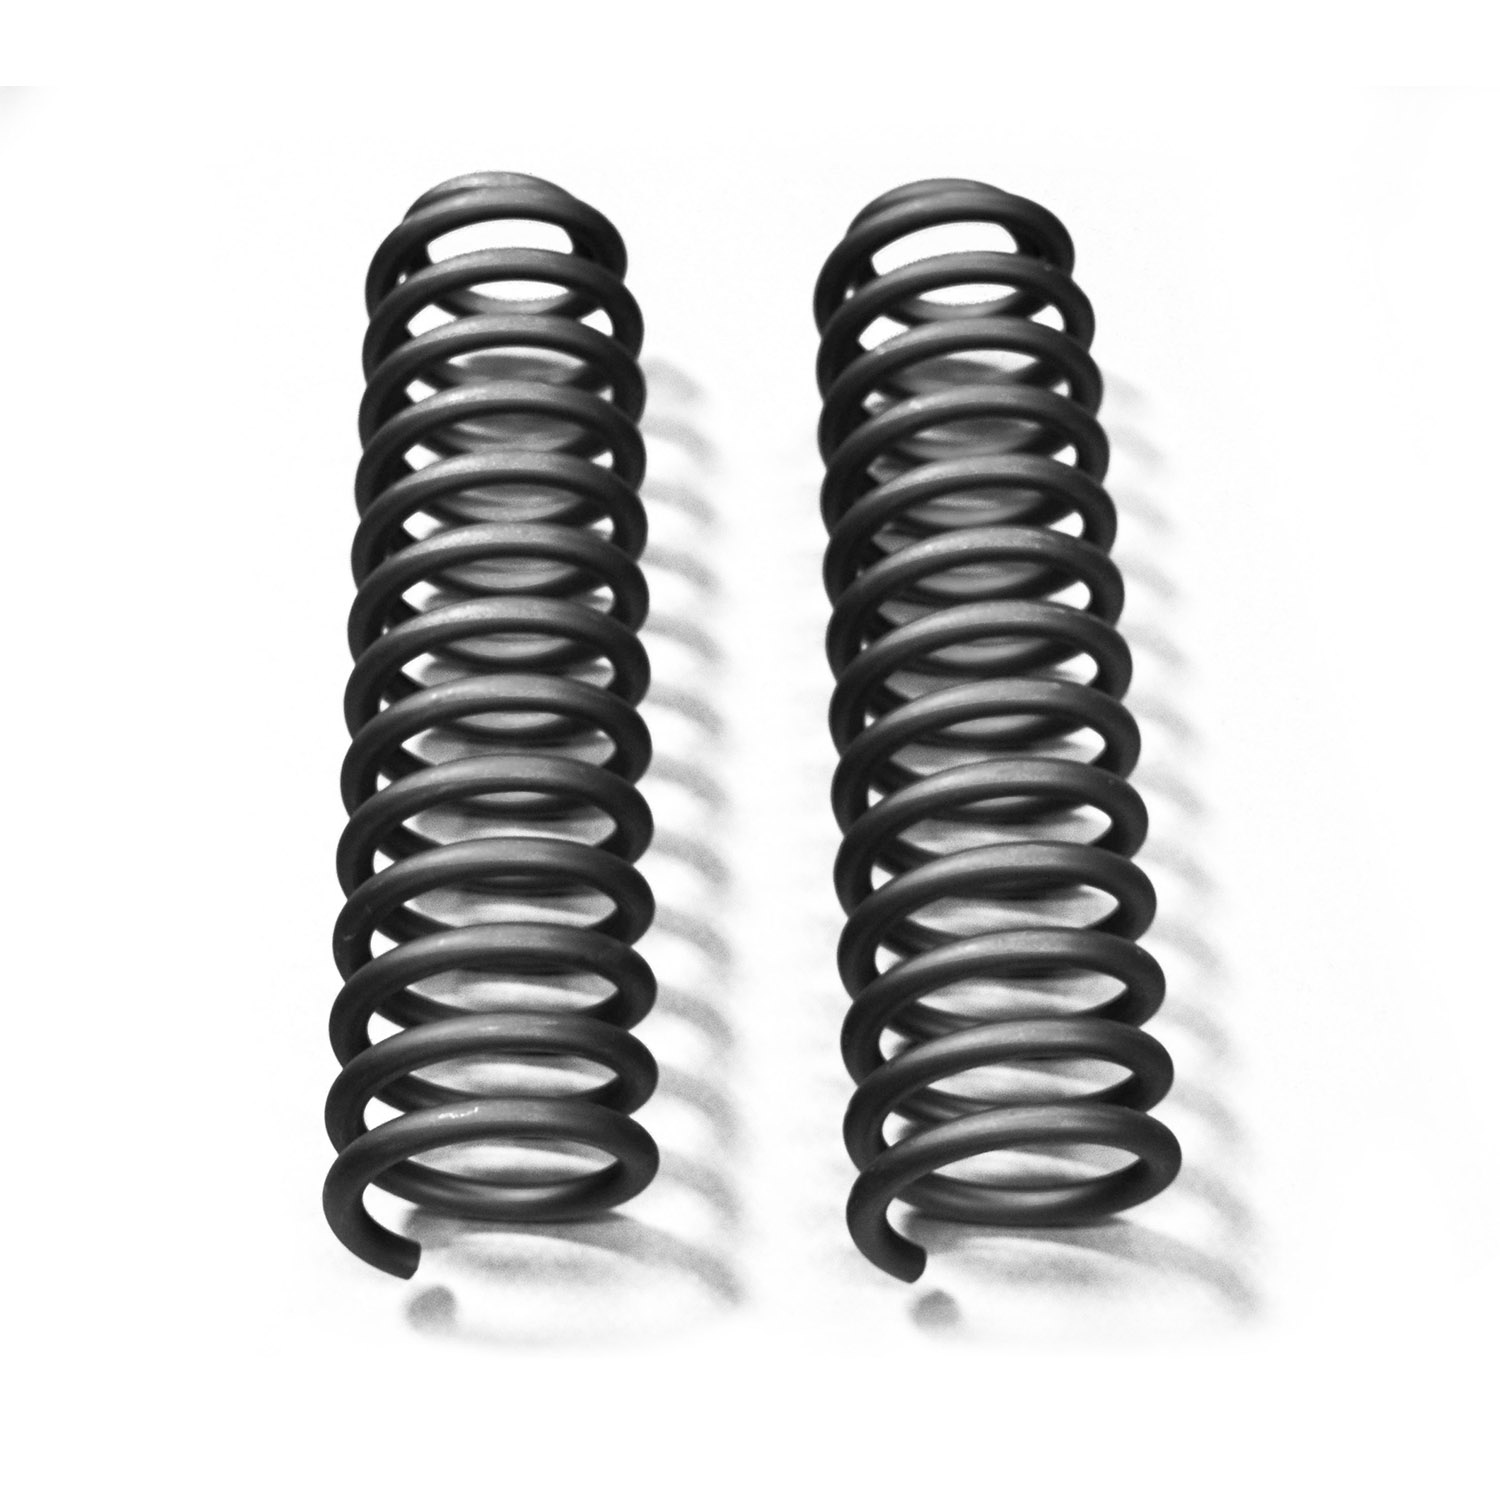 Jeep JK Wrangler 4.0 inch Lift Front Coil Springs